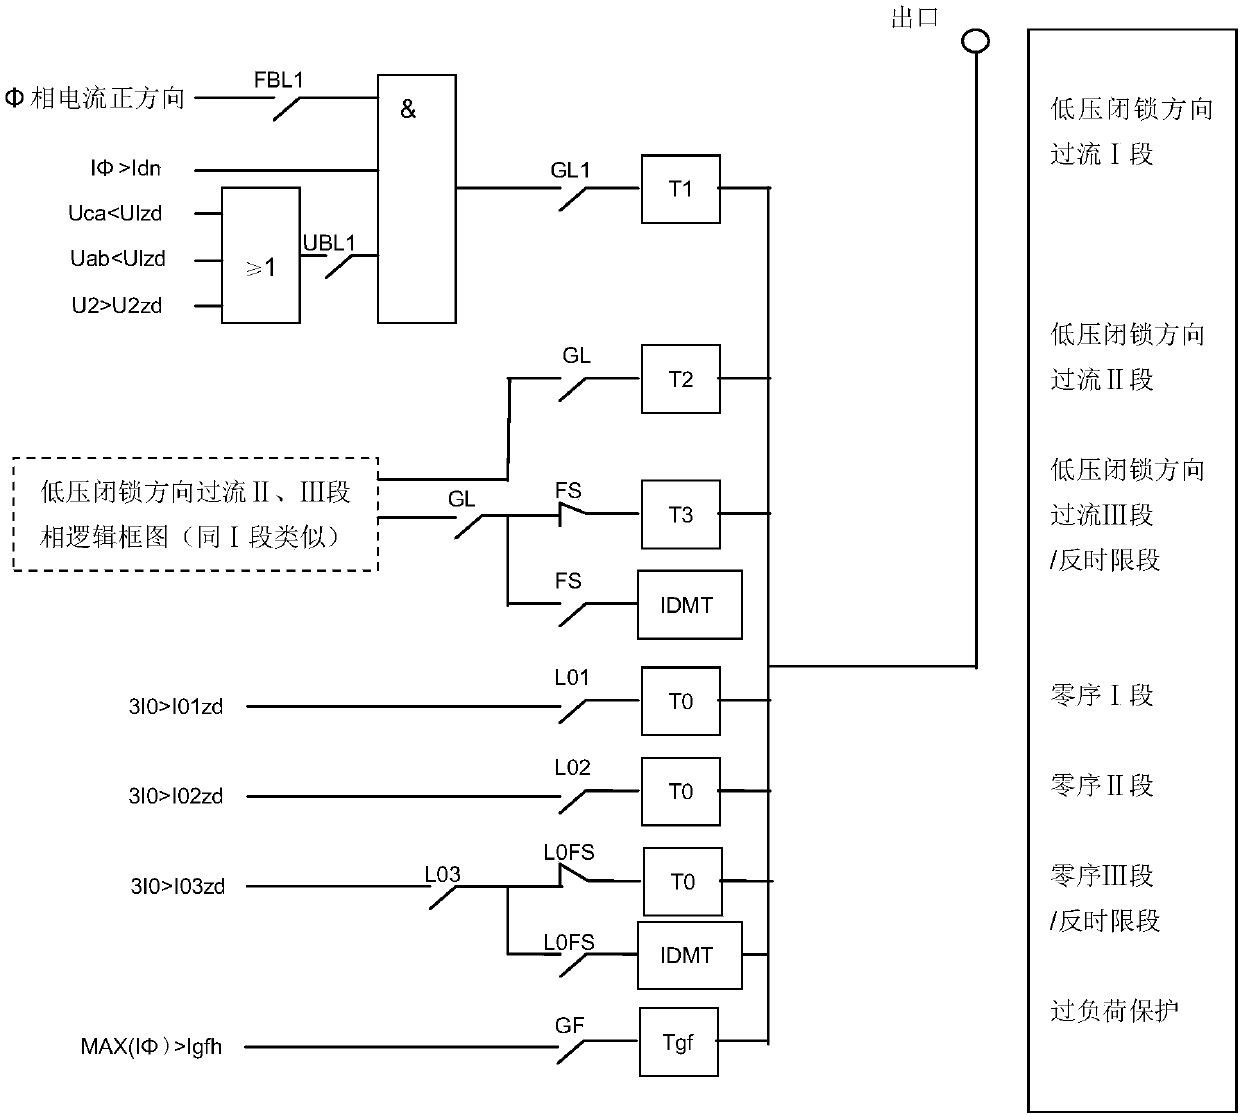 Transformer station routine distributed line protective device test method